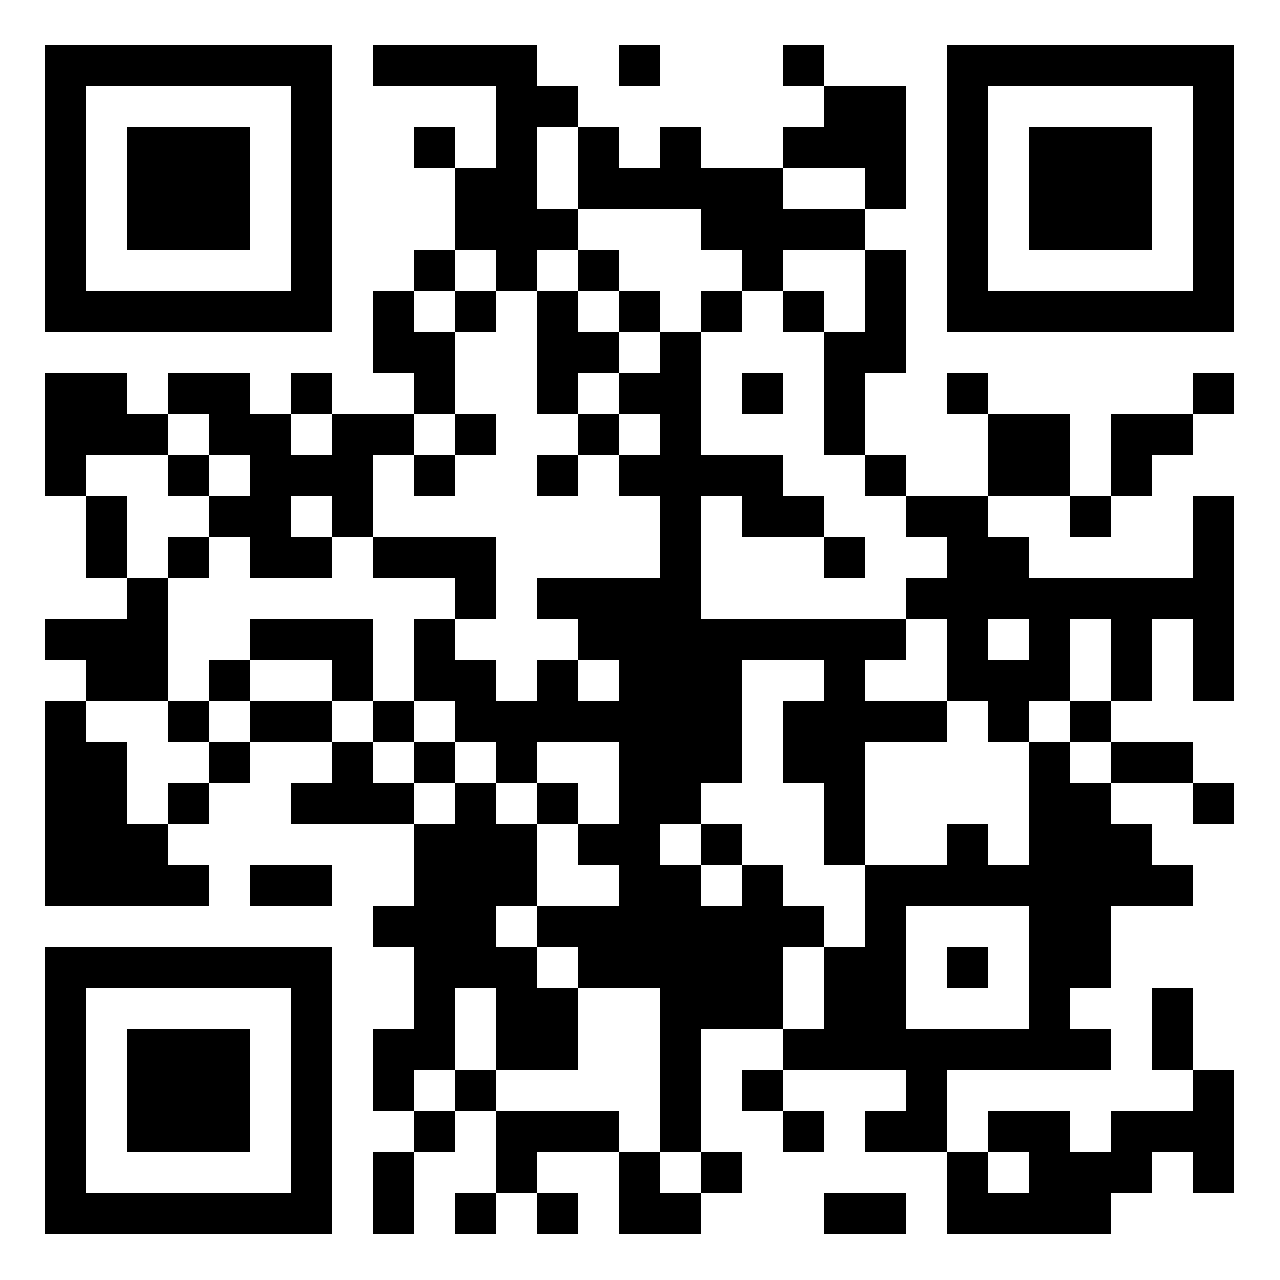 Concours__The_Musician_QRcode.png